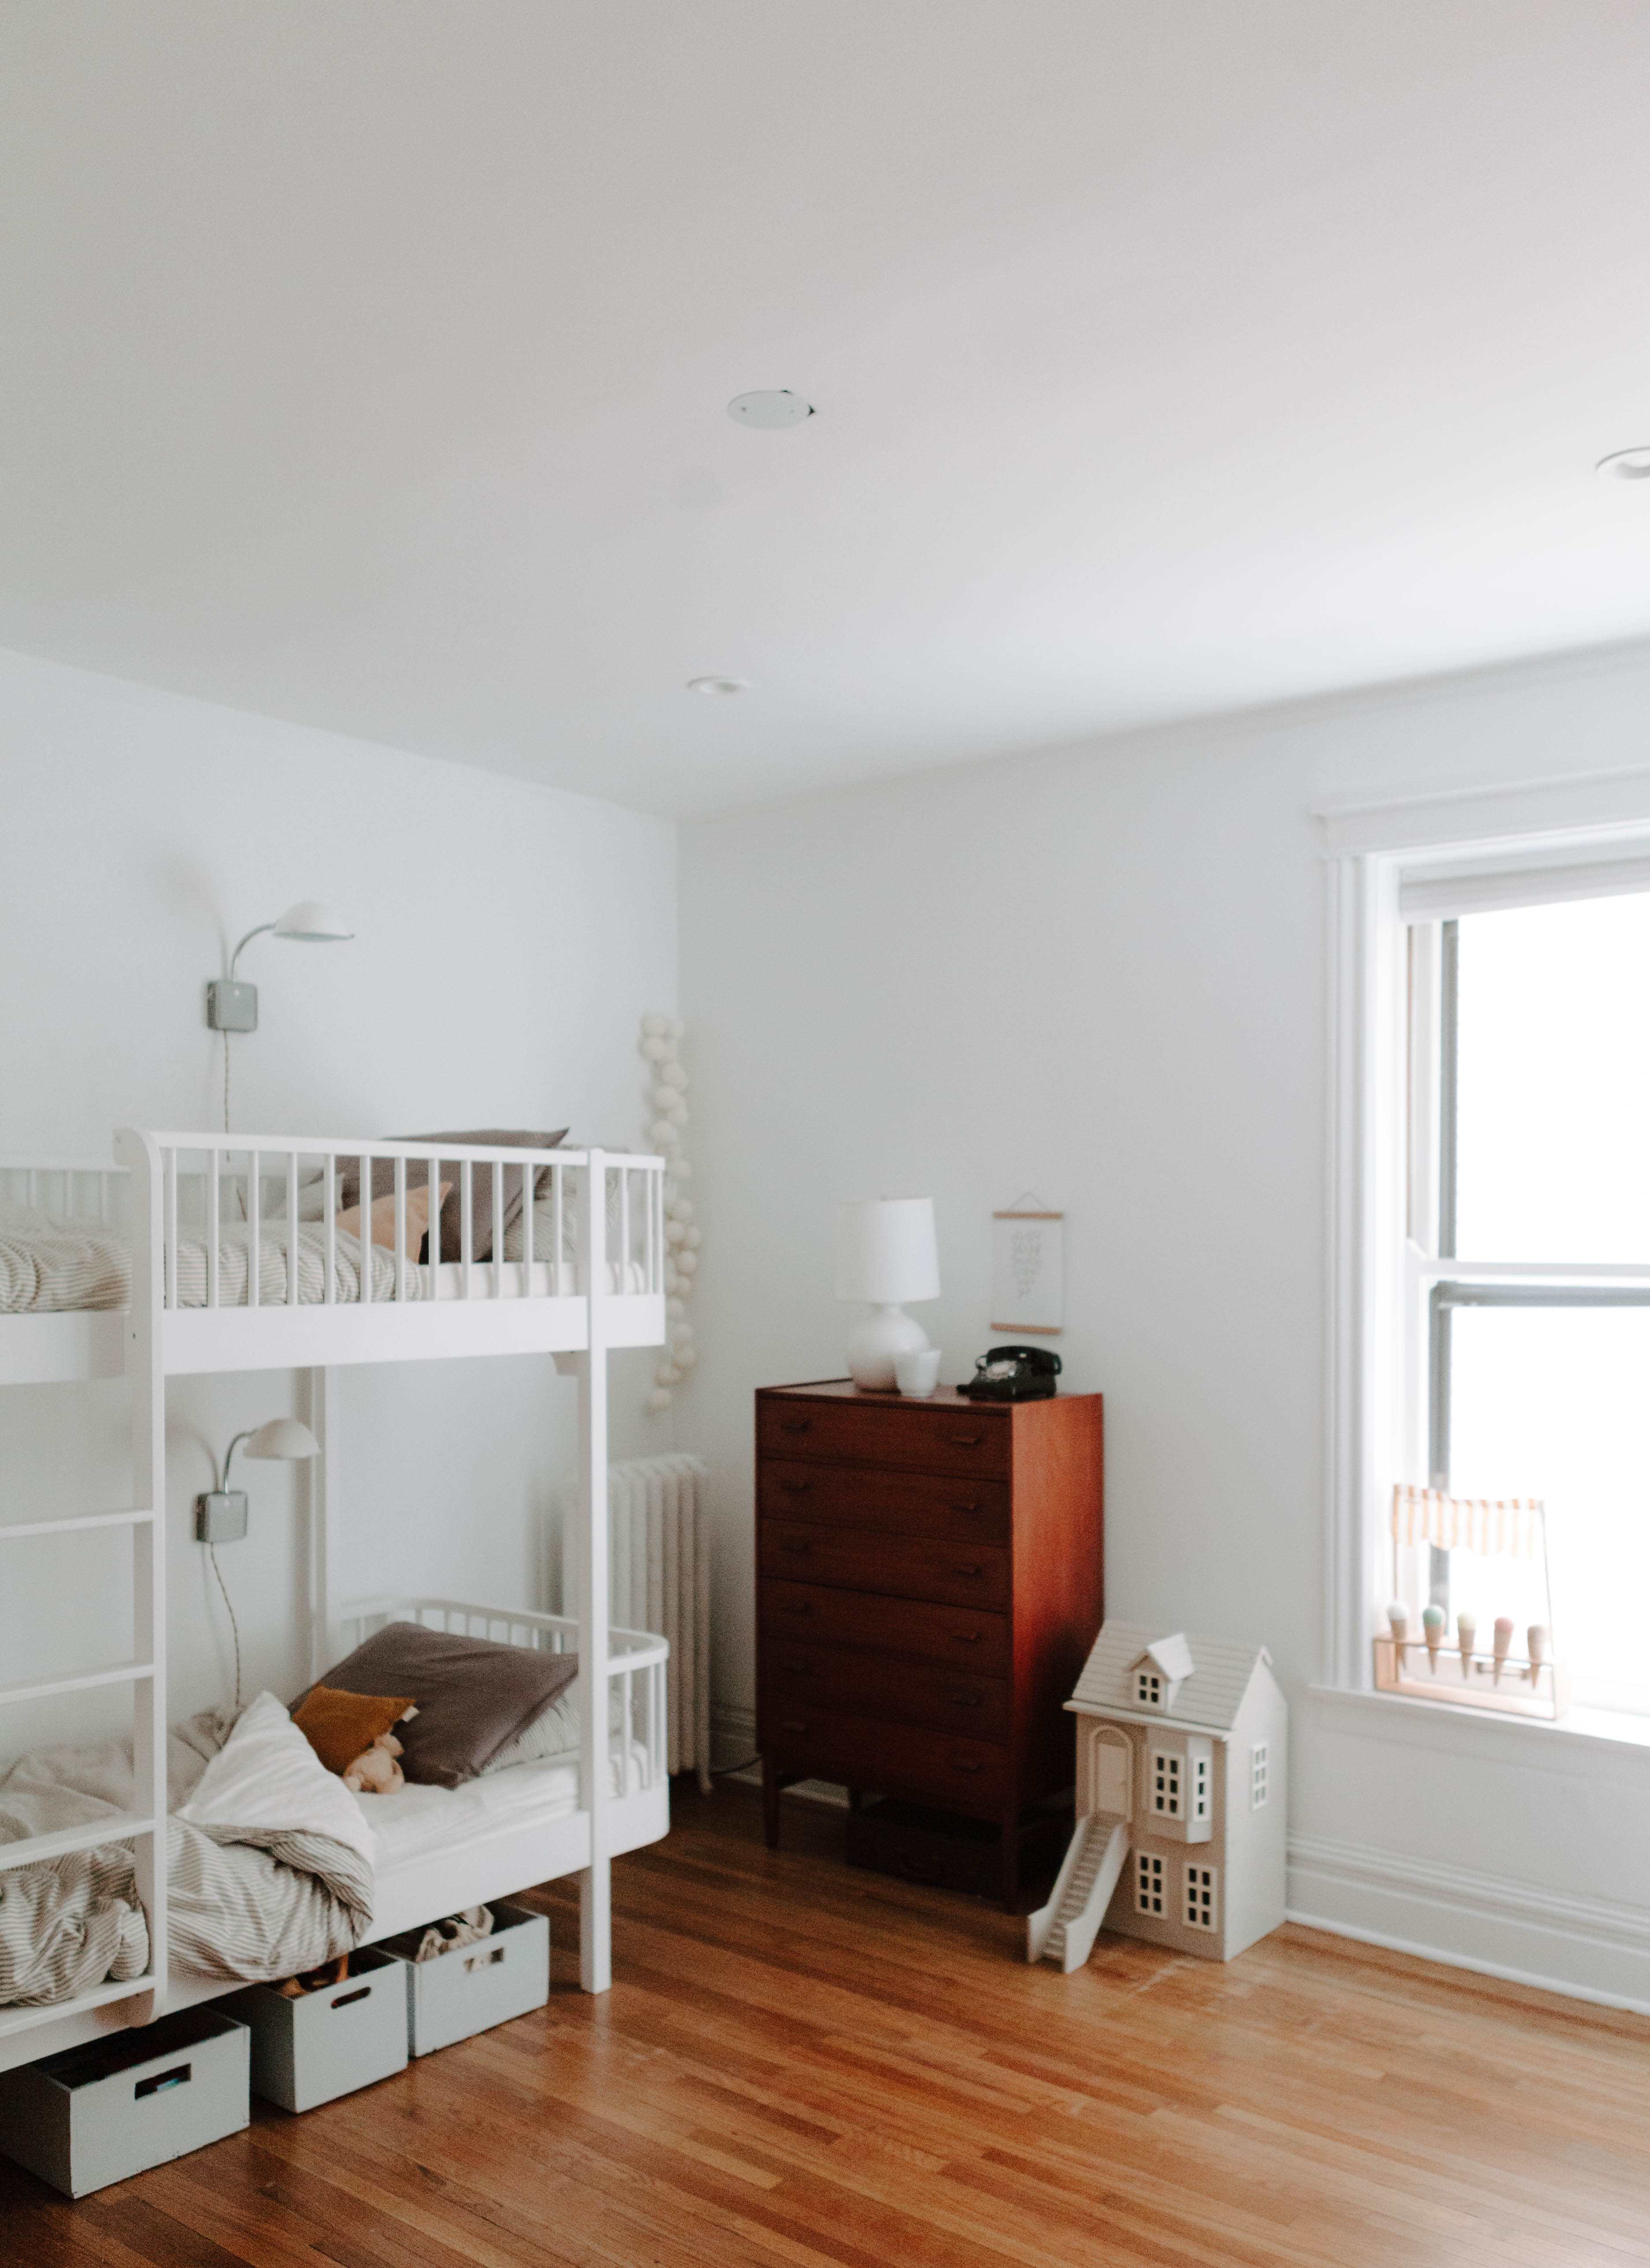 white bunk bed and dress in a white room